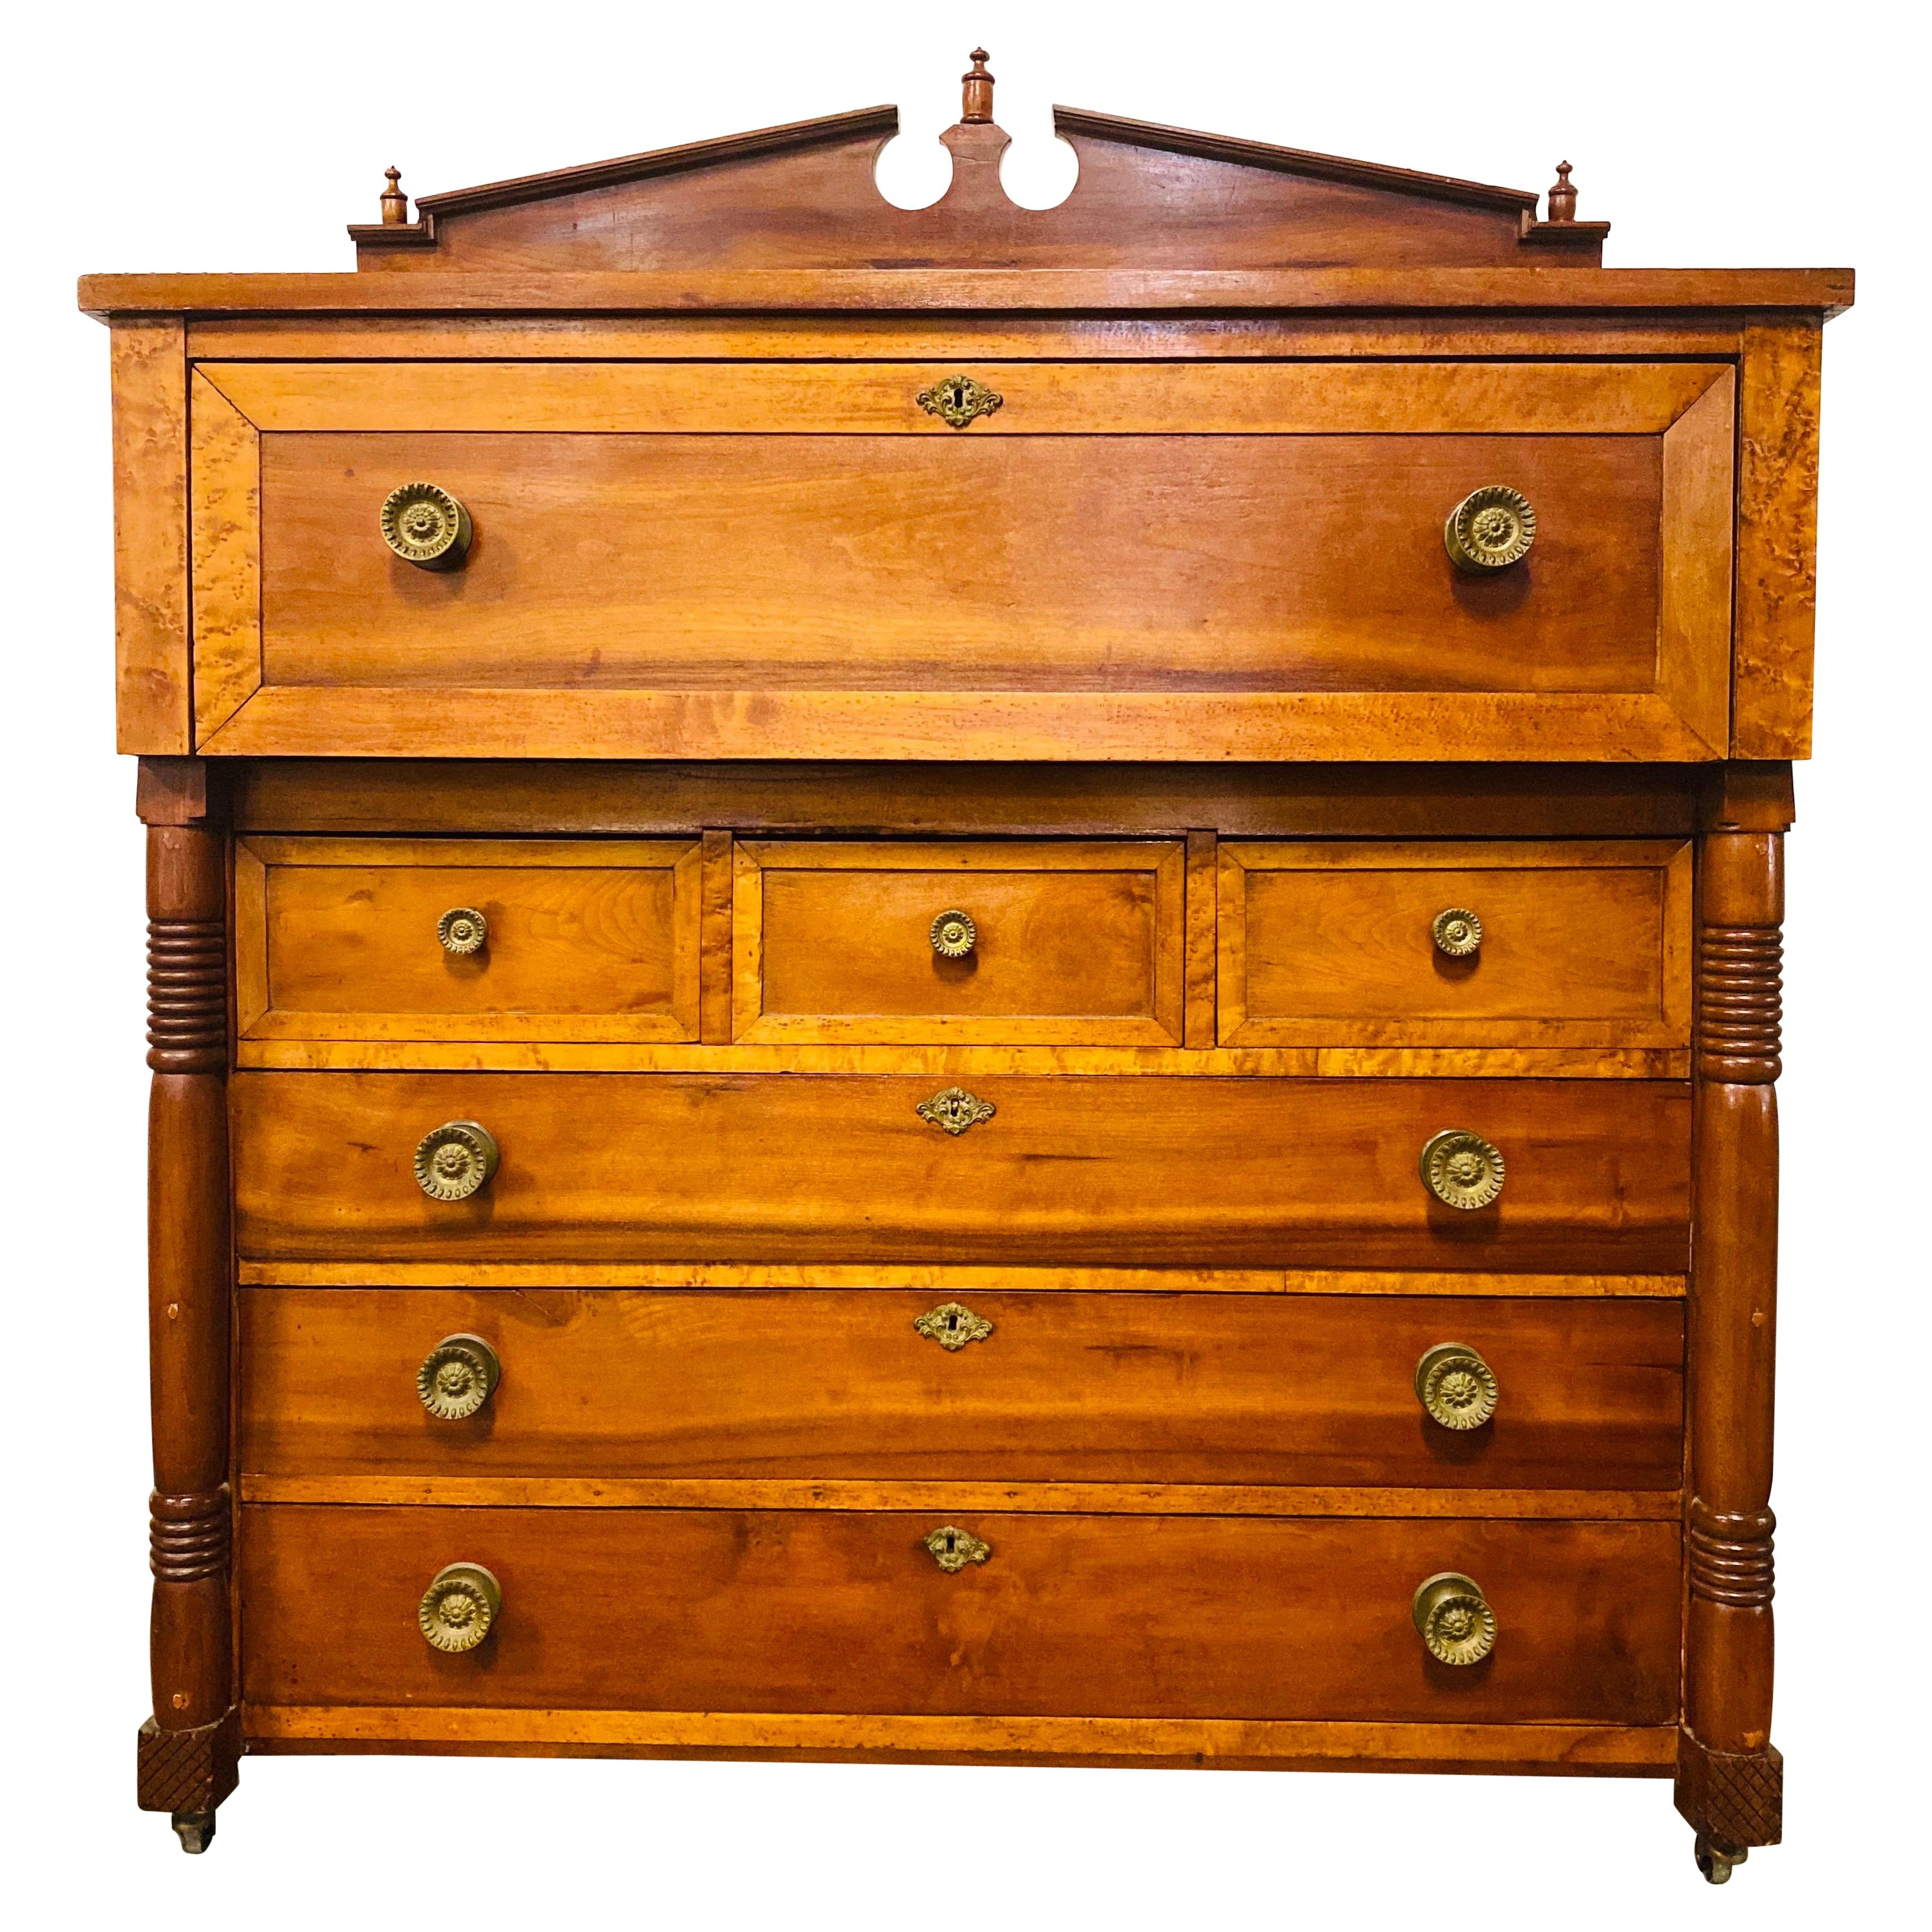 Handsome 19th century American Empire handcrafted Chester drawers For Sale